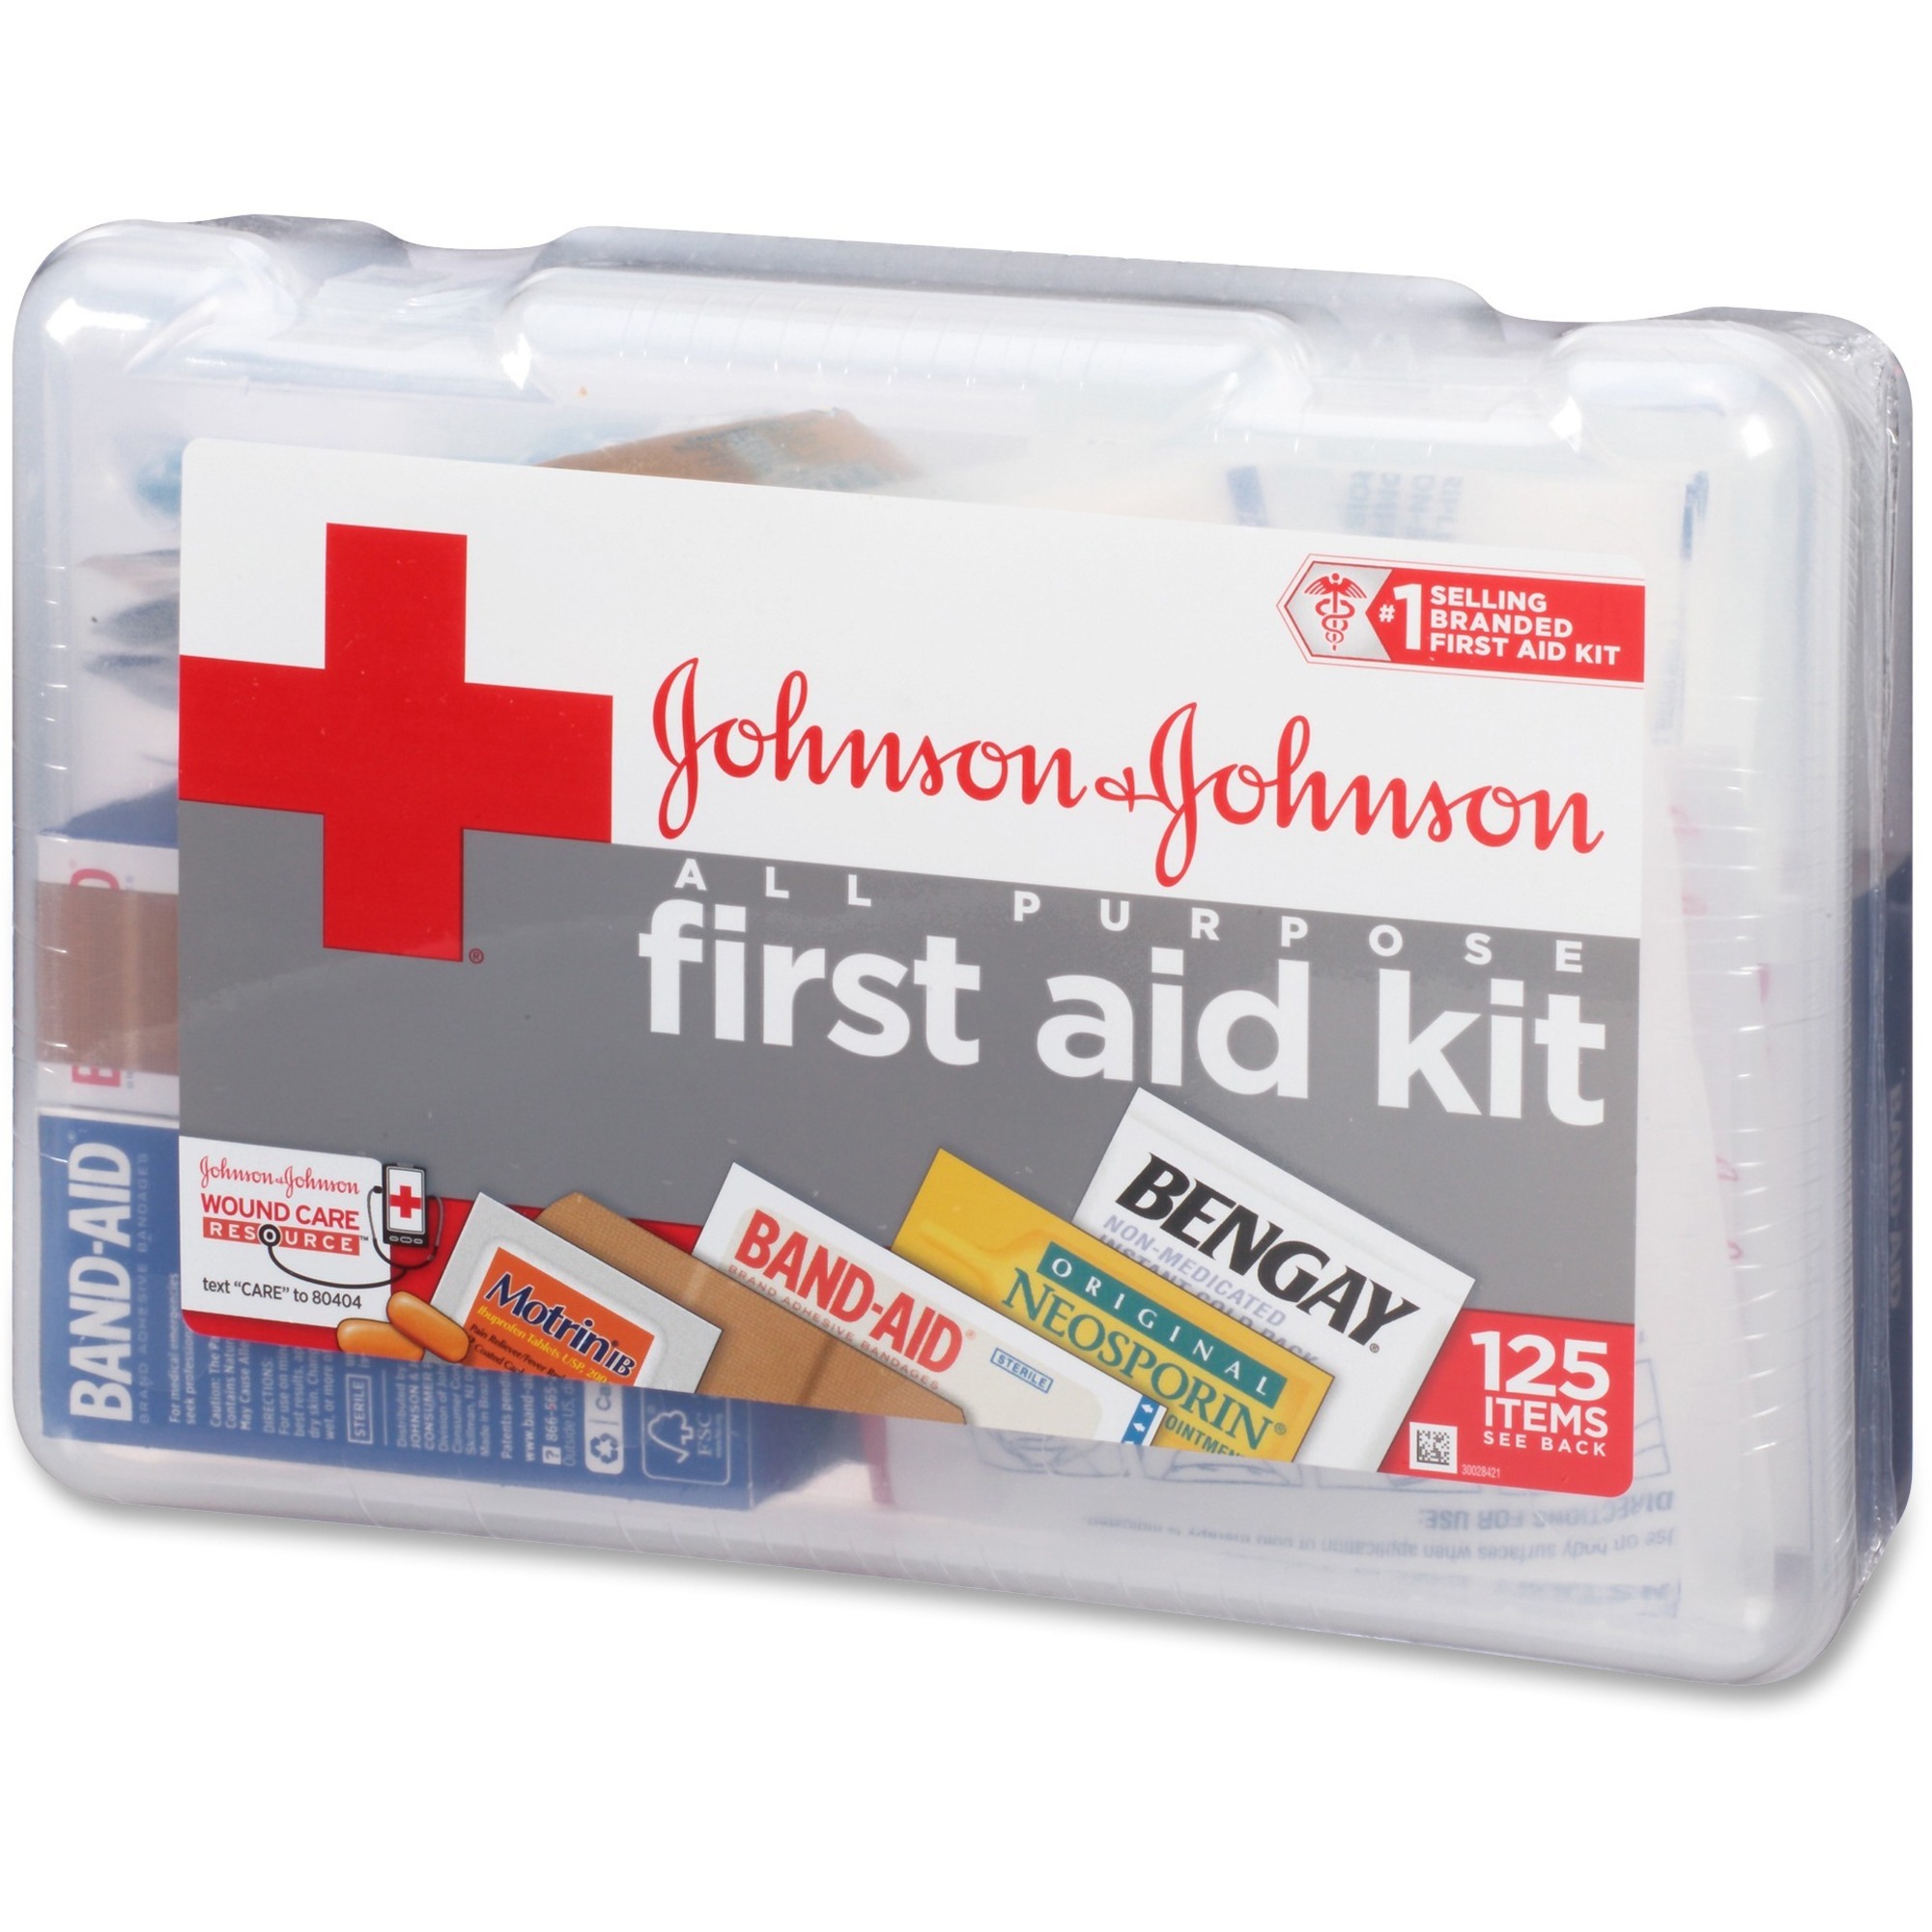 All Purpose 125-item First Aid Kit - image 2 of 3